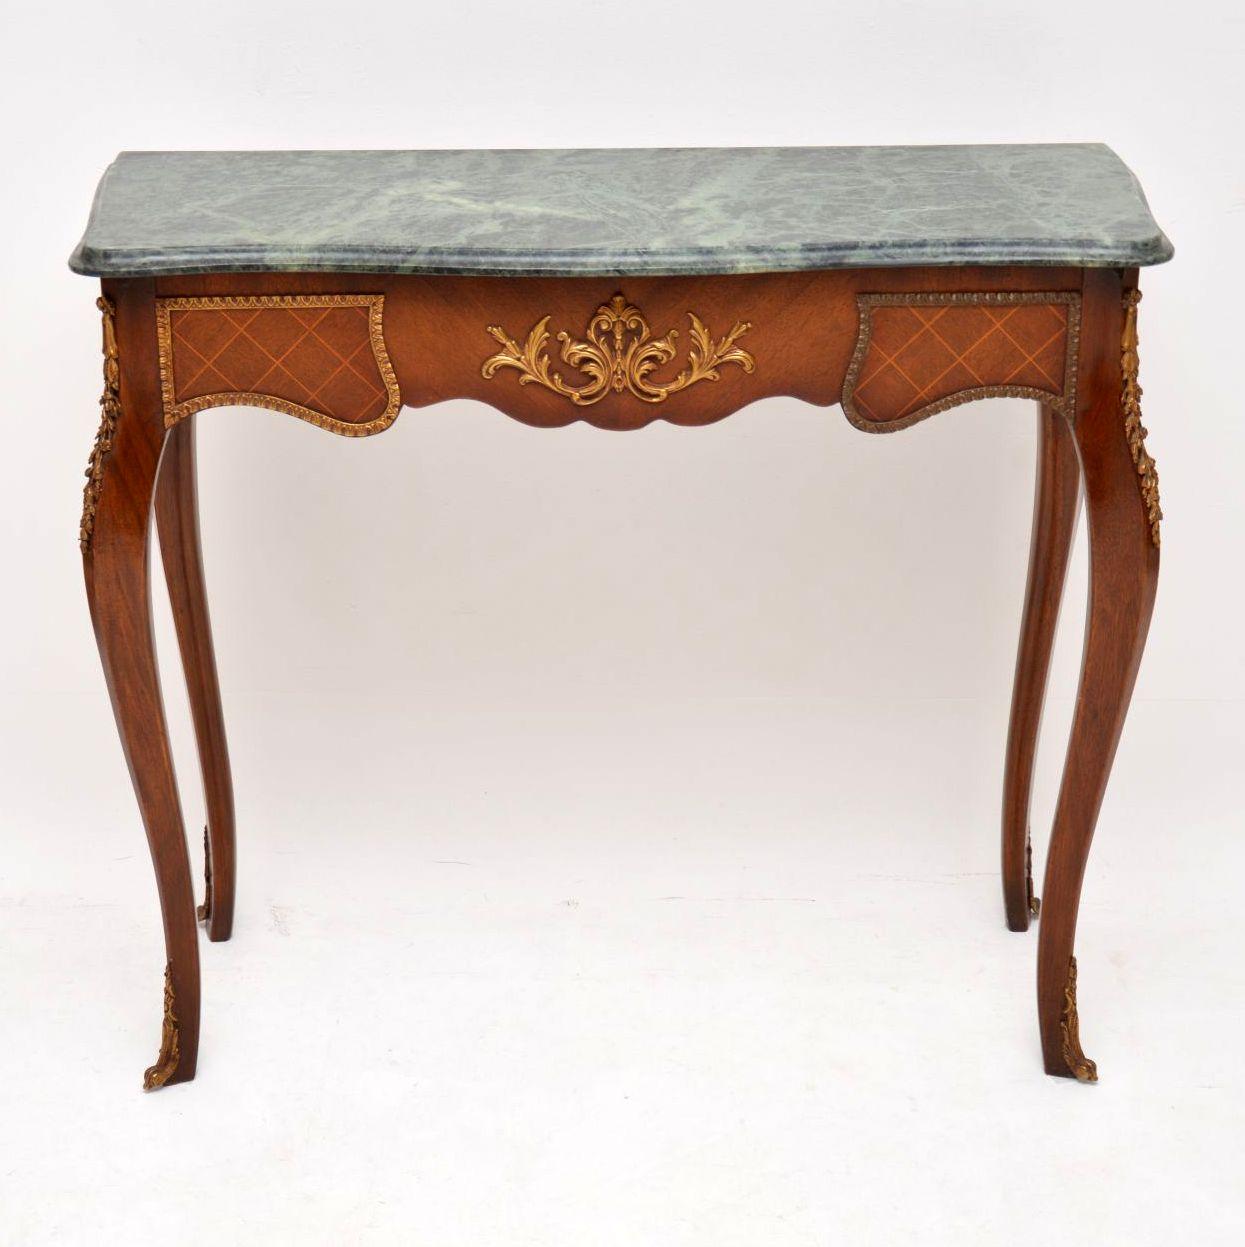 Antique French marble-top console side table in mahogany and king wood with some fine satinwood diamond shaped inlays around the top edge. This table has gilt bronze mounts and feet which have mellowed with age. It has French cabriole legs and the